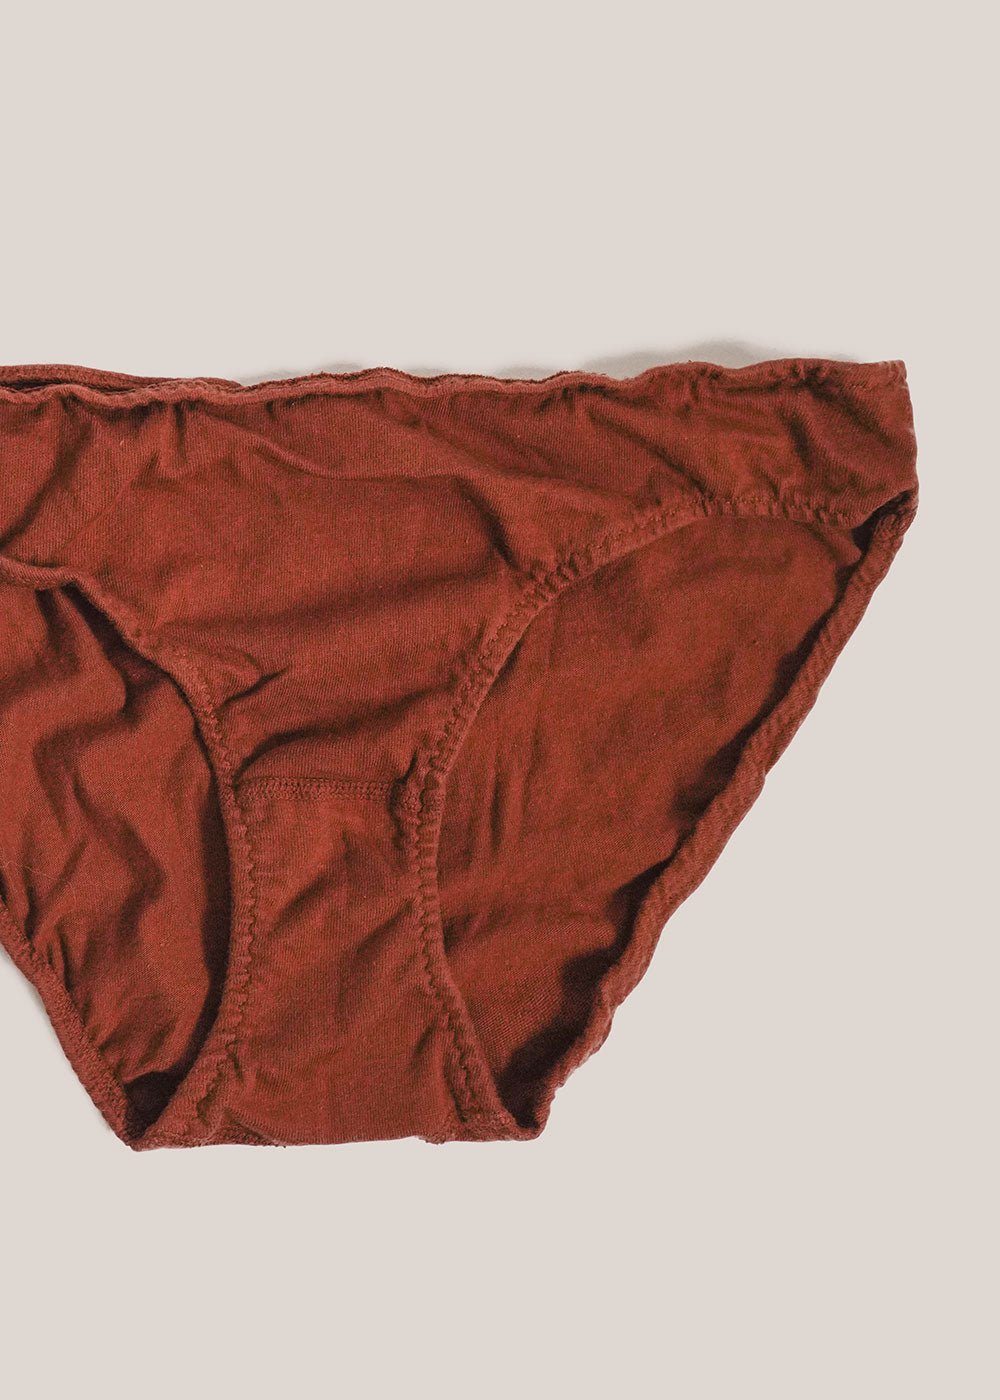 Pansy Rust Low Rise Underwear - New Classics Studios Sustainable Ethical Fashion Canada